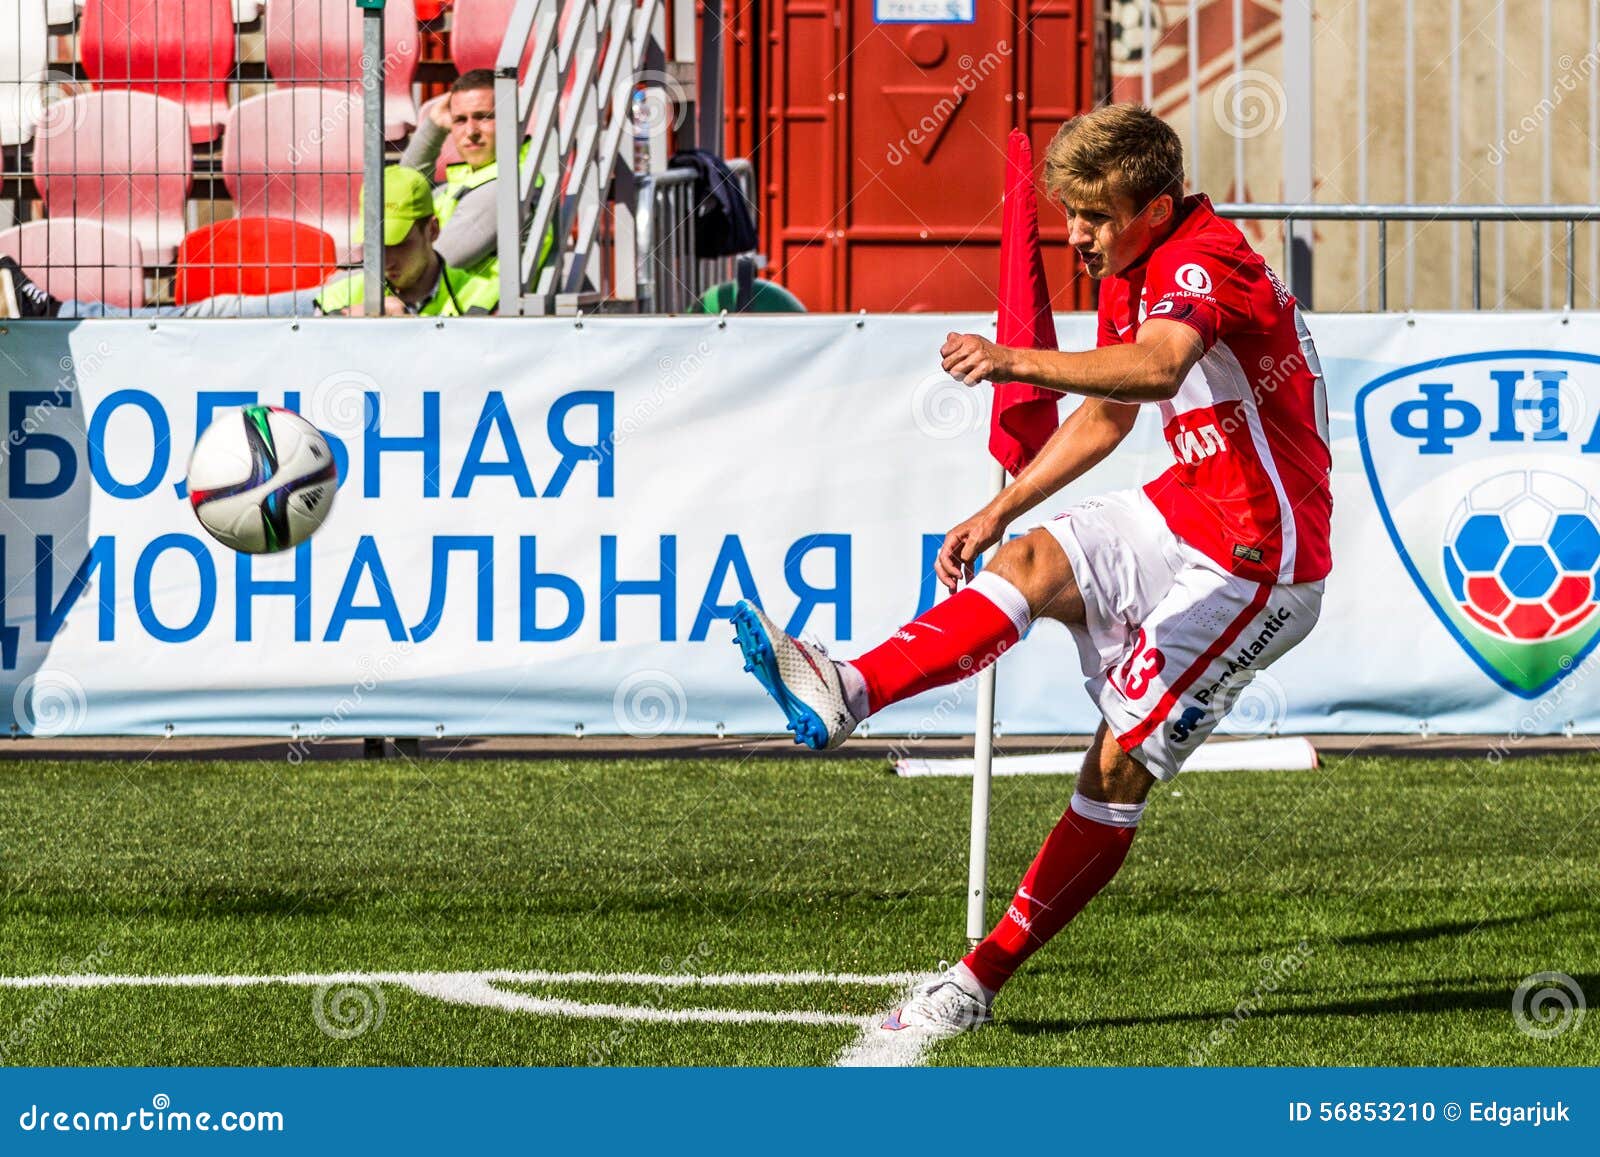 16.07.15 Spartak Moscow-youth 2-3 Ufa-youth, Game Moments